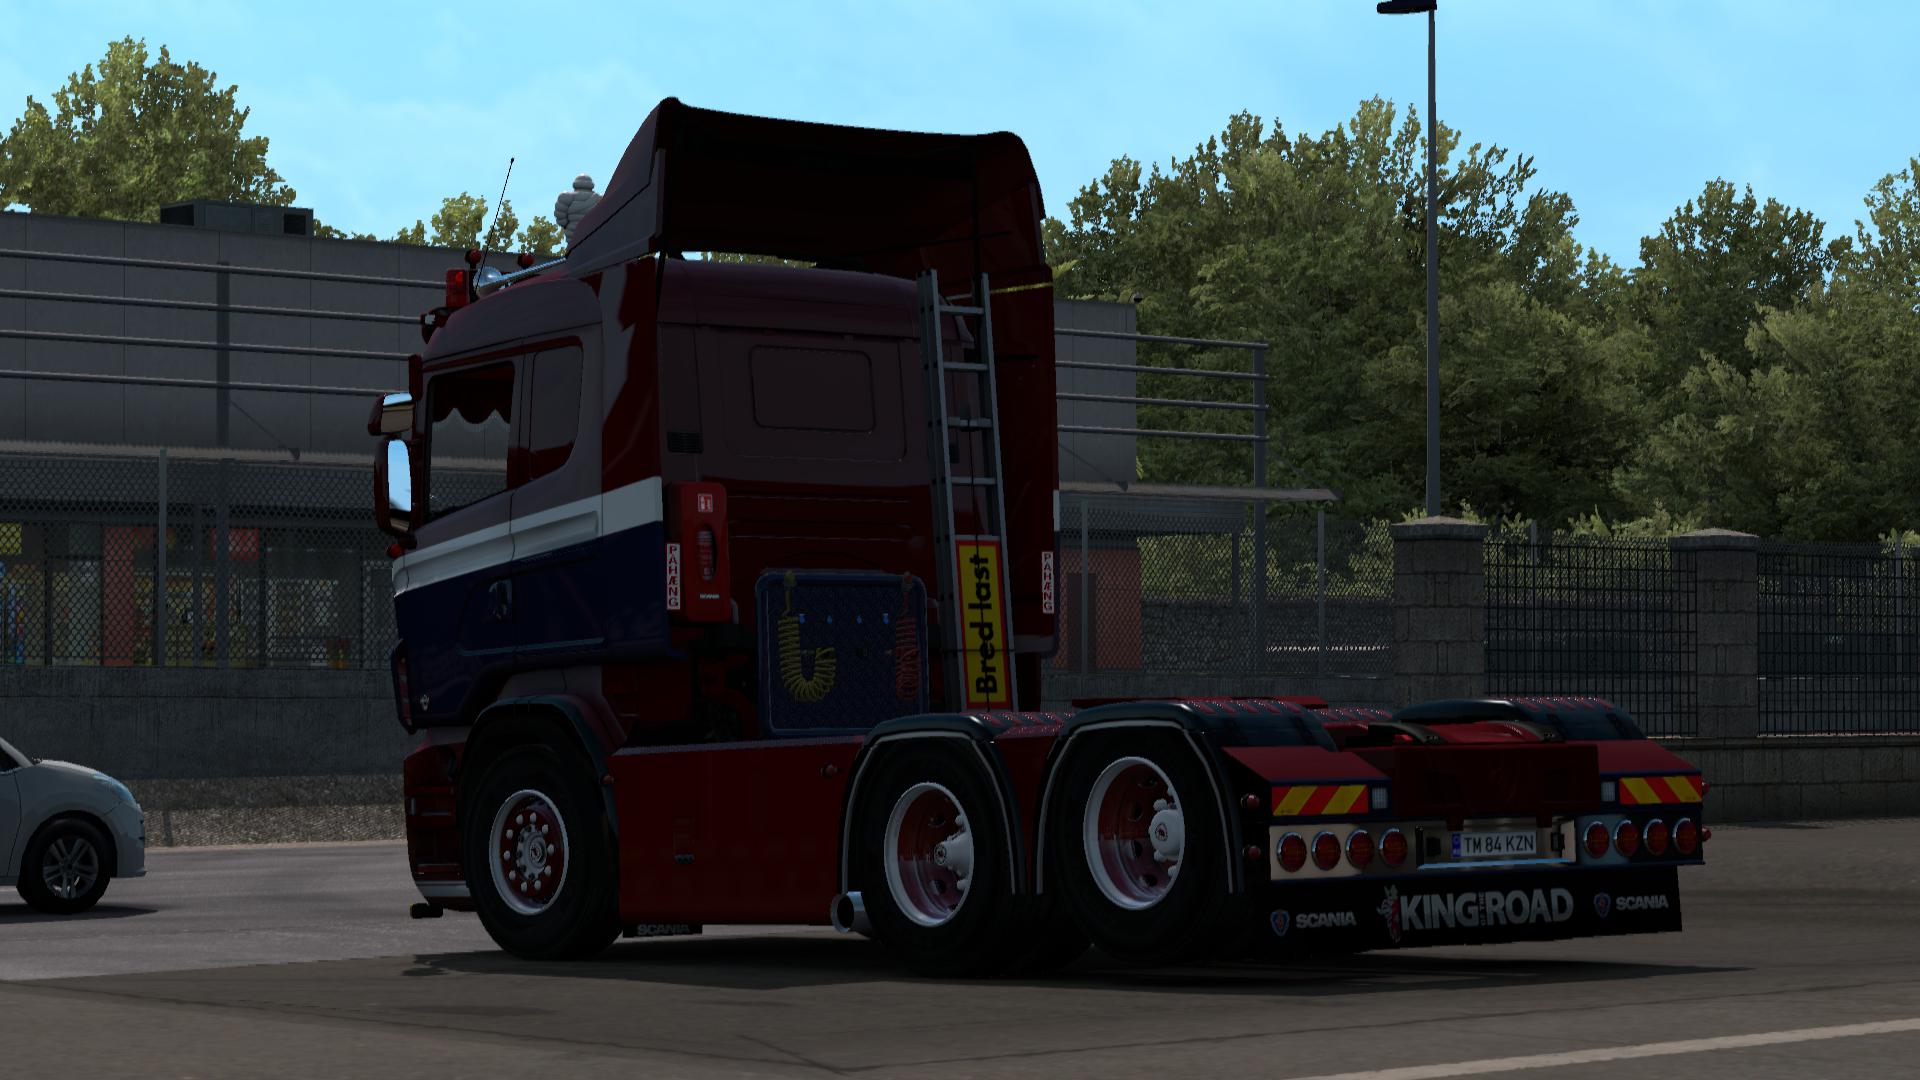 Scania R4 Series Addon For Rjl Scania V230 139x Ets2 Mods Images And Photos Finder